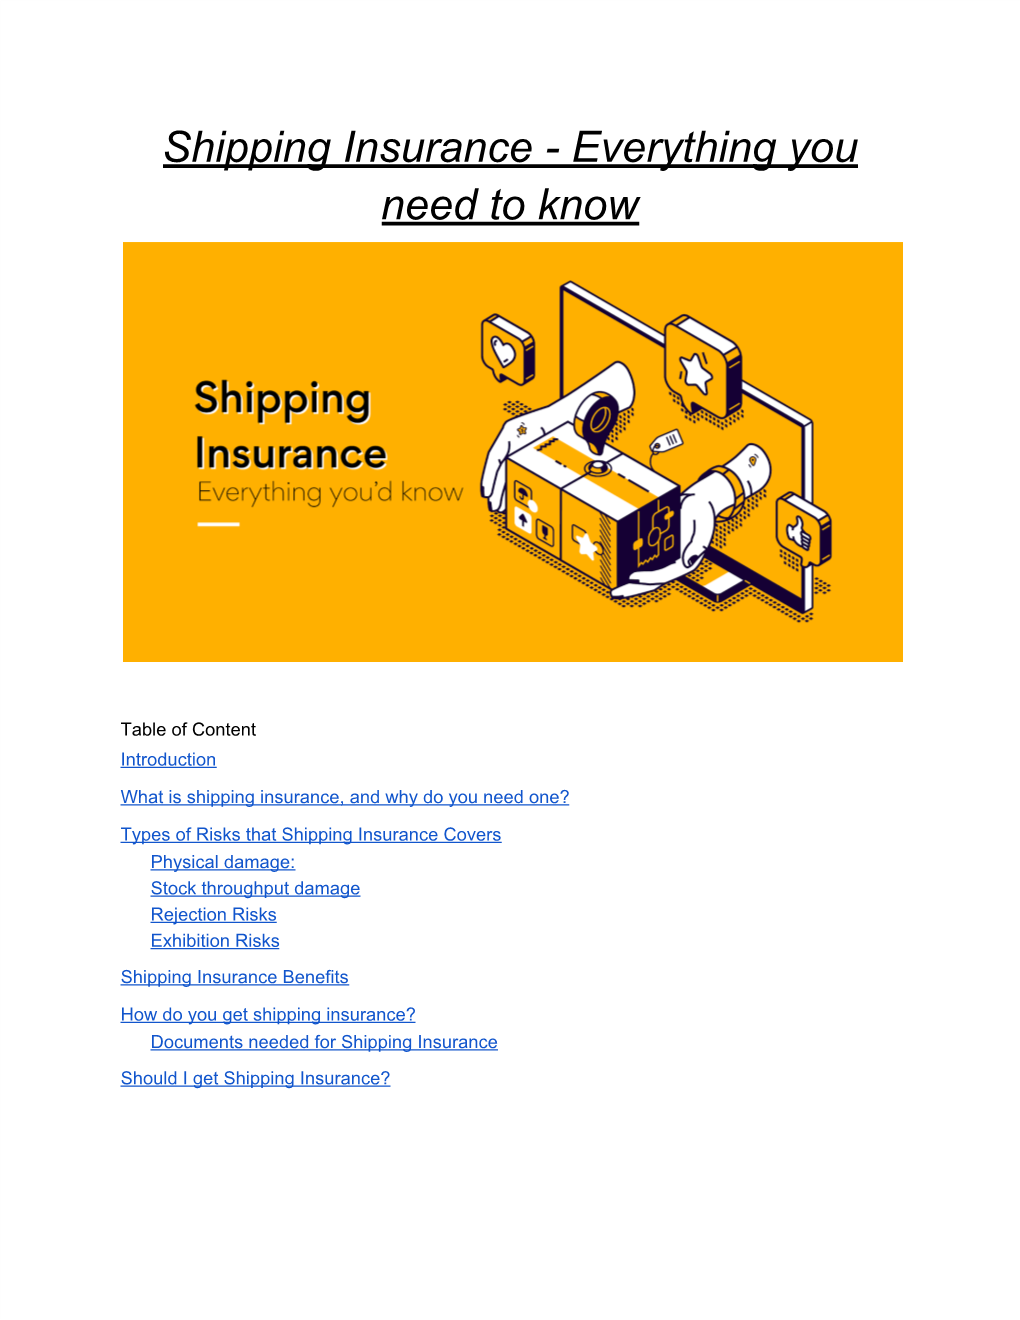 Shipping Insurance - Everything You Need to Know